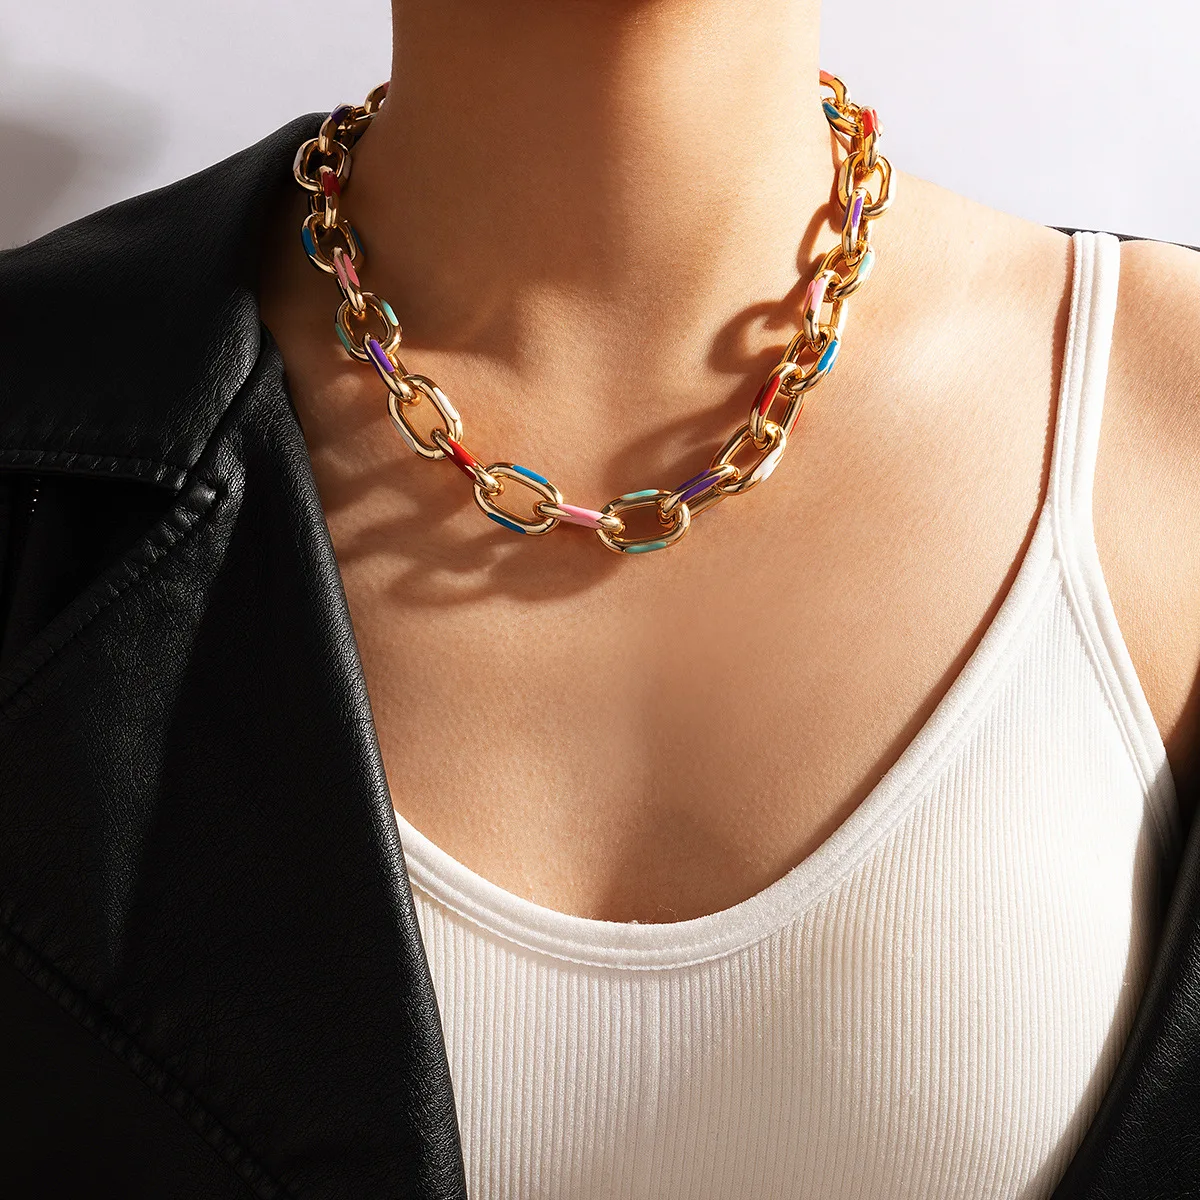 

Punk Style Adjustable Colorful Enamel Link Chain Clavicle Necklace 18K Gold Plated Oil Drip Geometric Link Chain Necklace for Hi